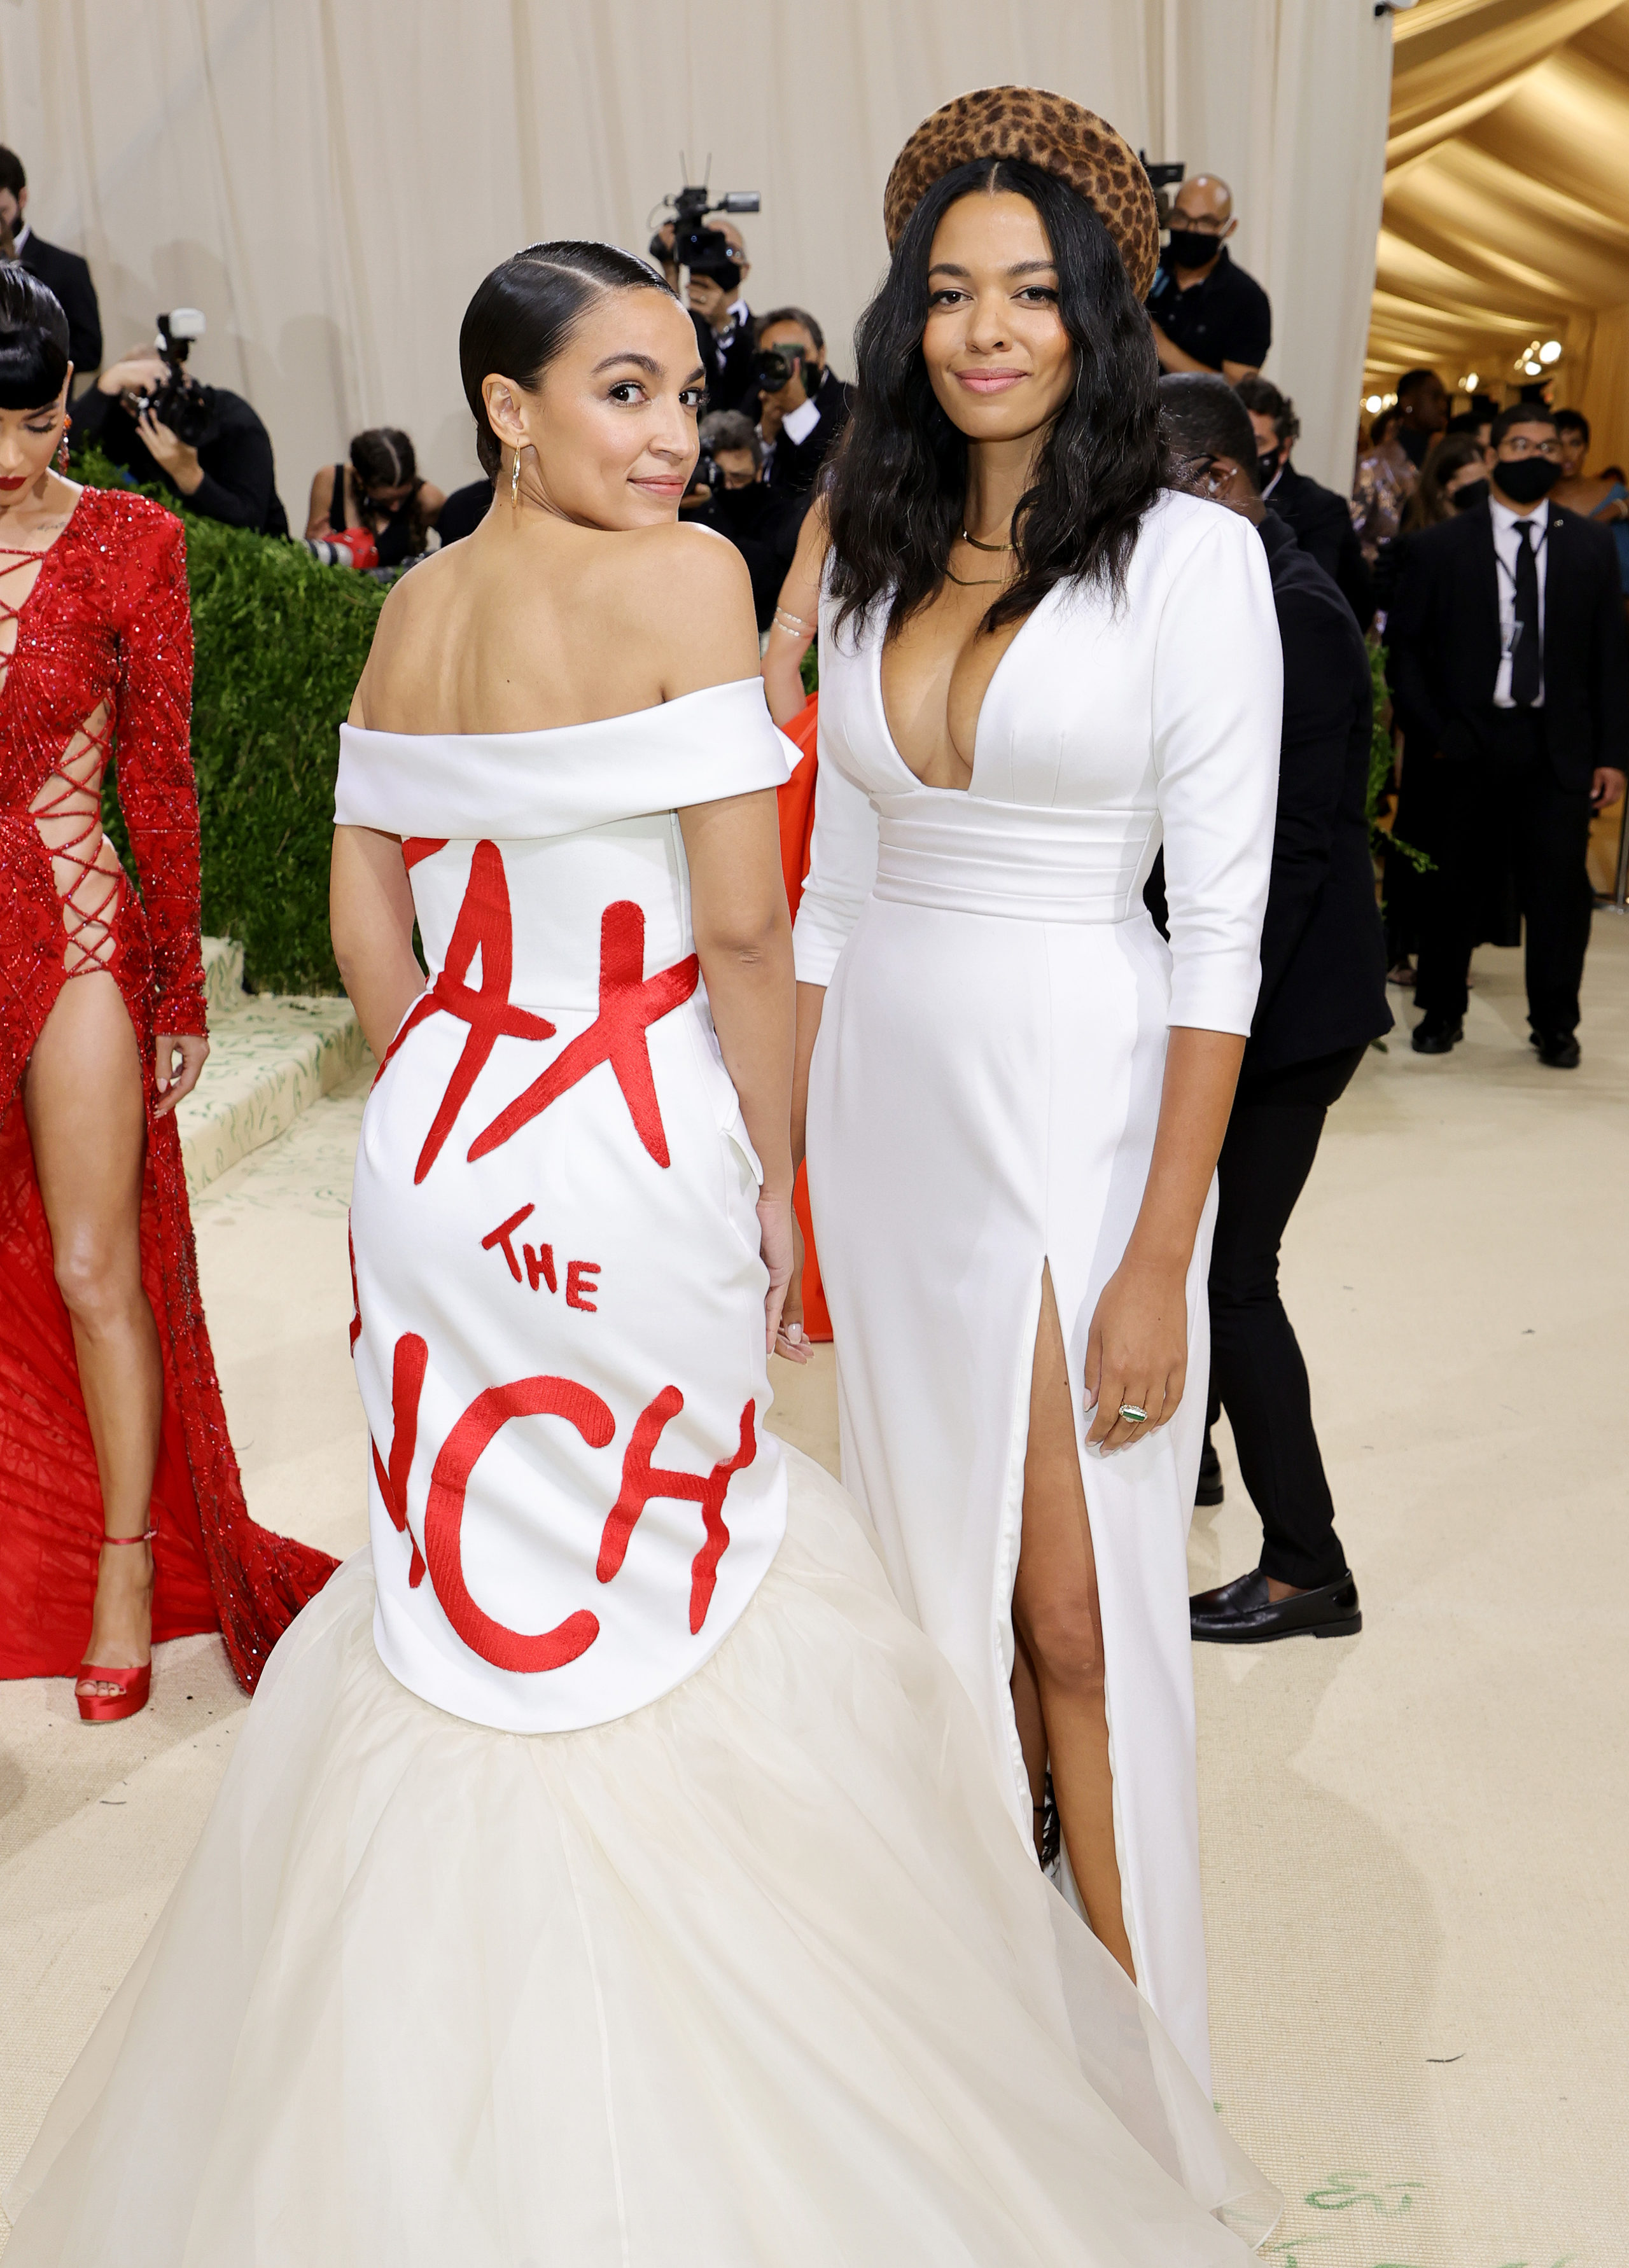 Alexandria Ocasio-Cortez (L) and Aurora James attend The 2021 Met Gala Celebrating In America: A Lexicon Of Fashion at Metropolitan Museum of Art on September 13, 2021, in New York City. (Mike Coppola/Getty Images)